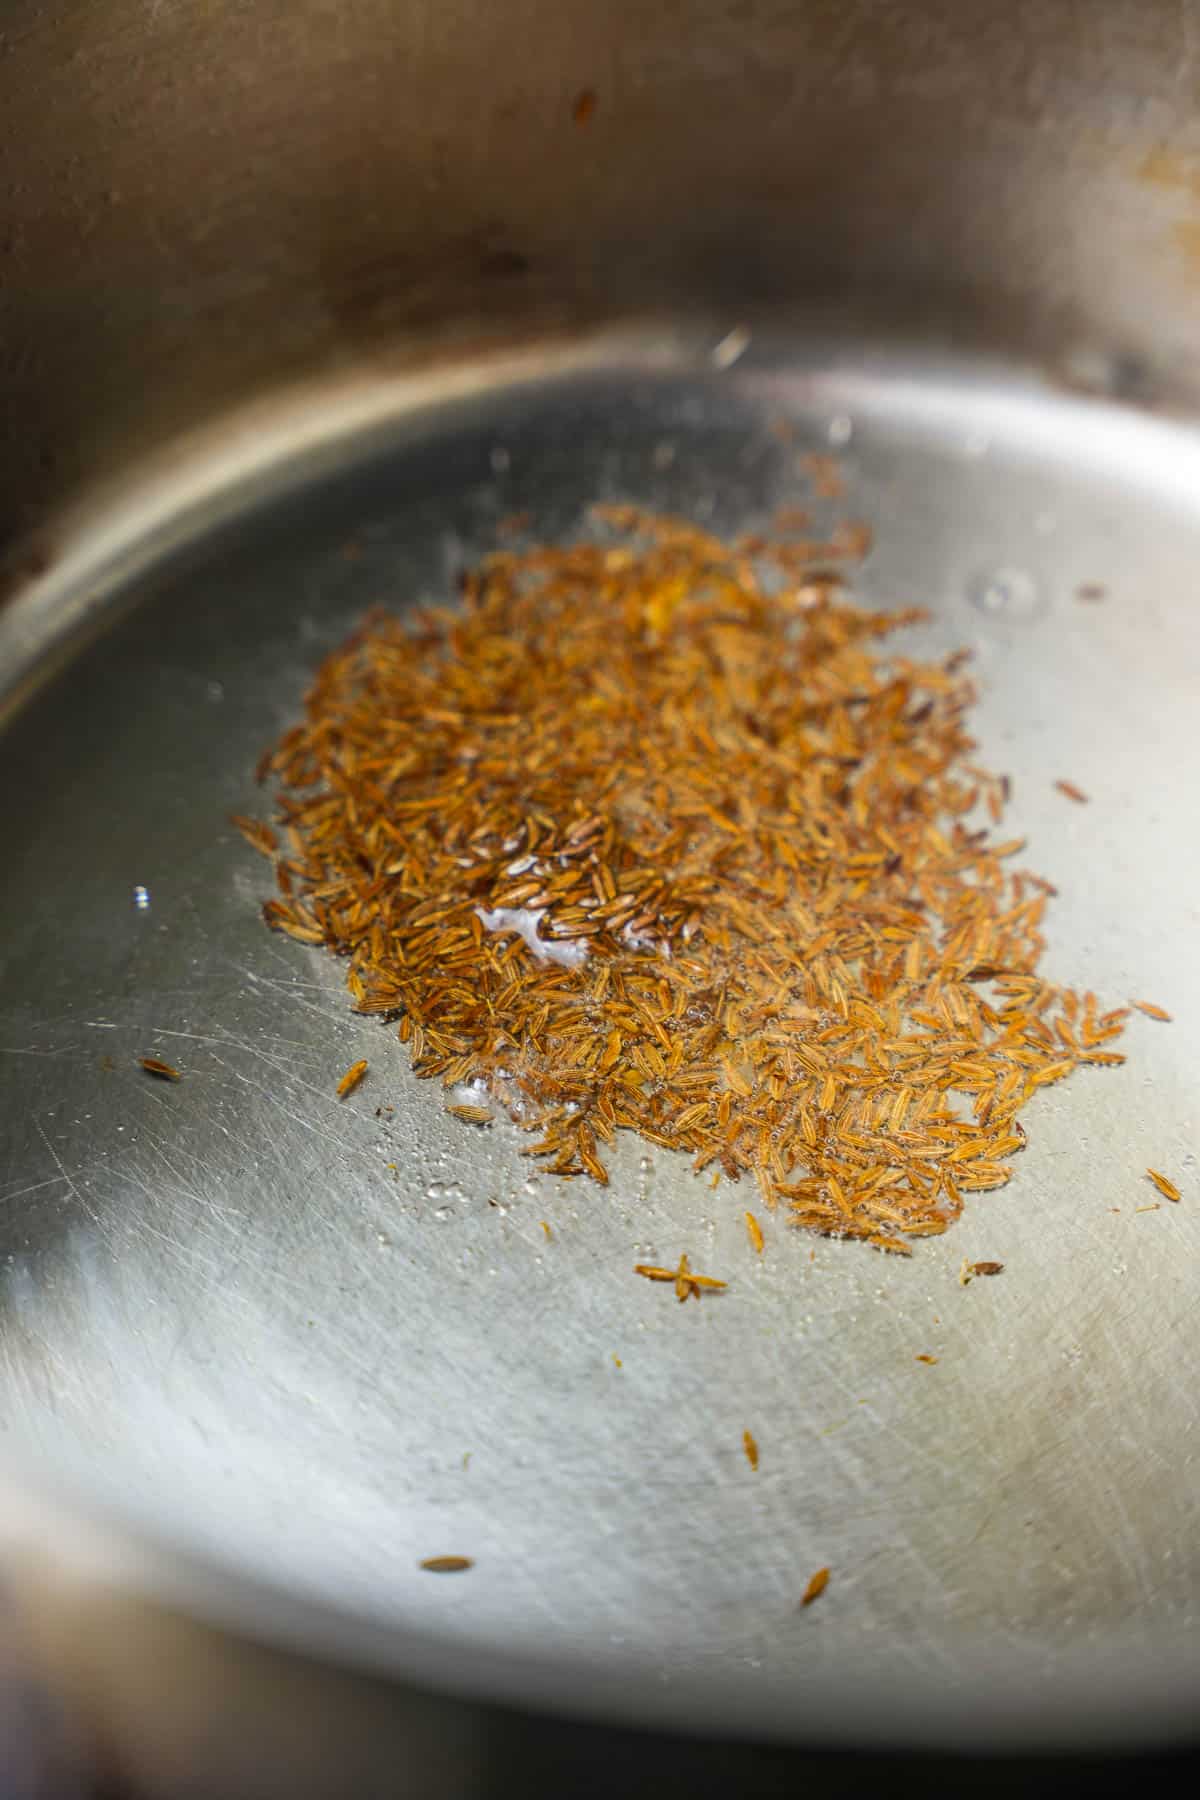 Cumin seeds frying in hot oil in a stainless steel pot.